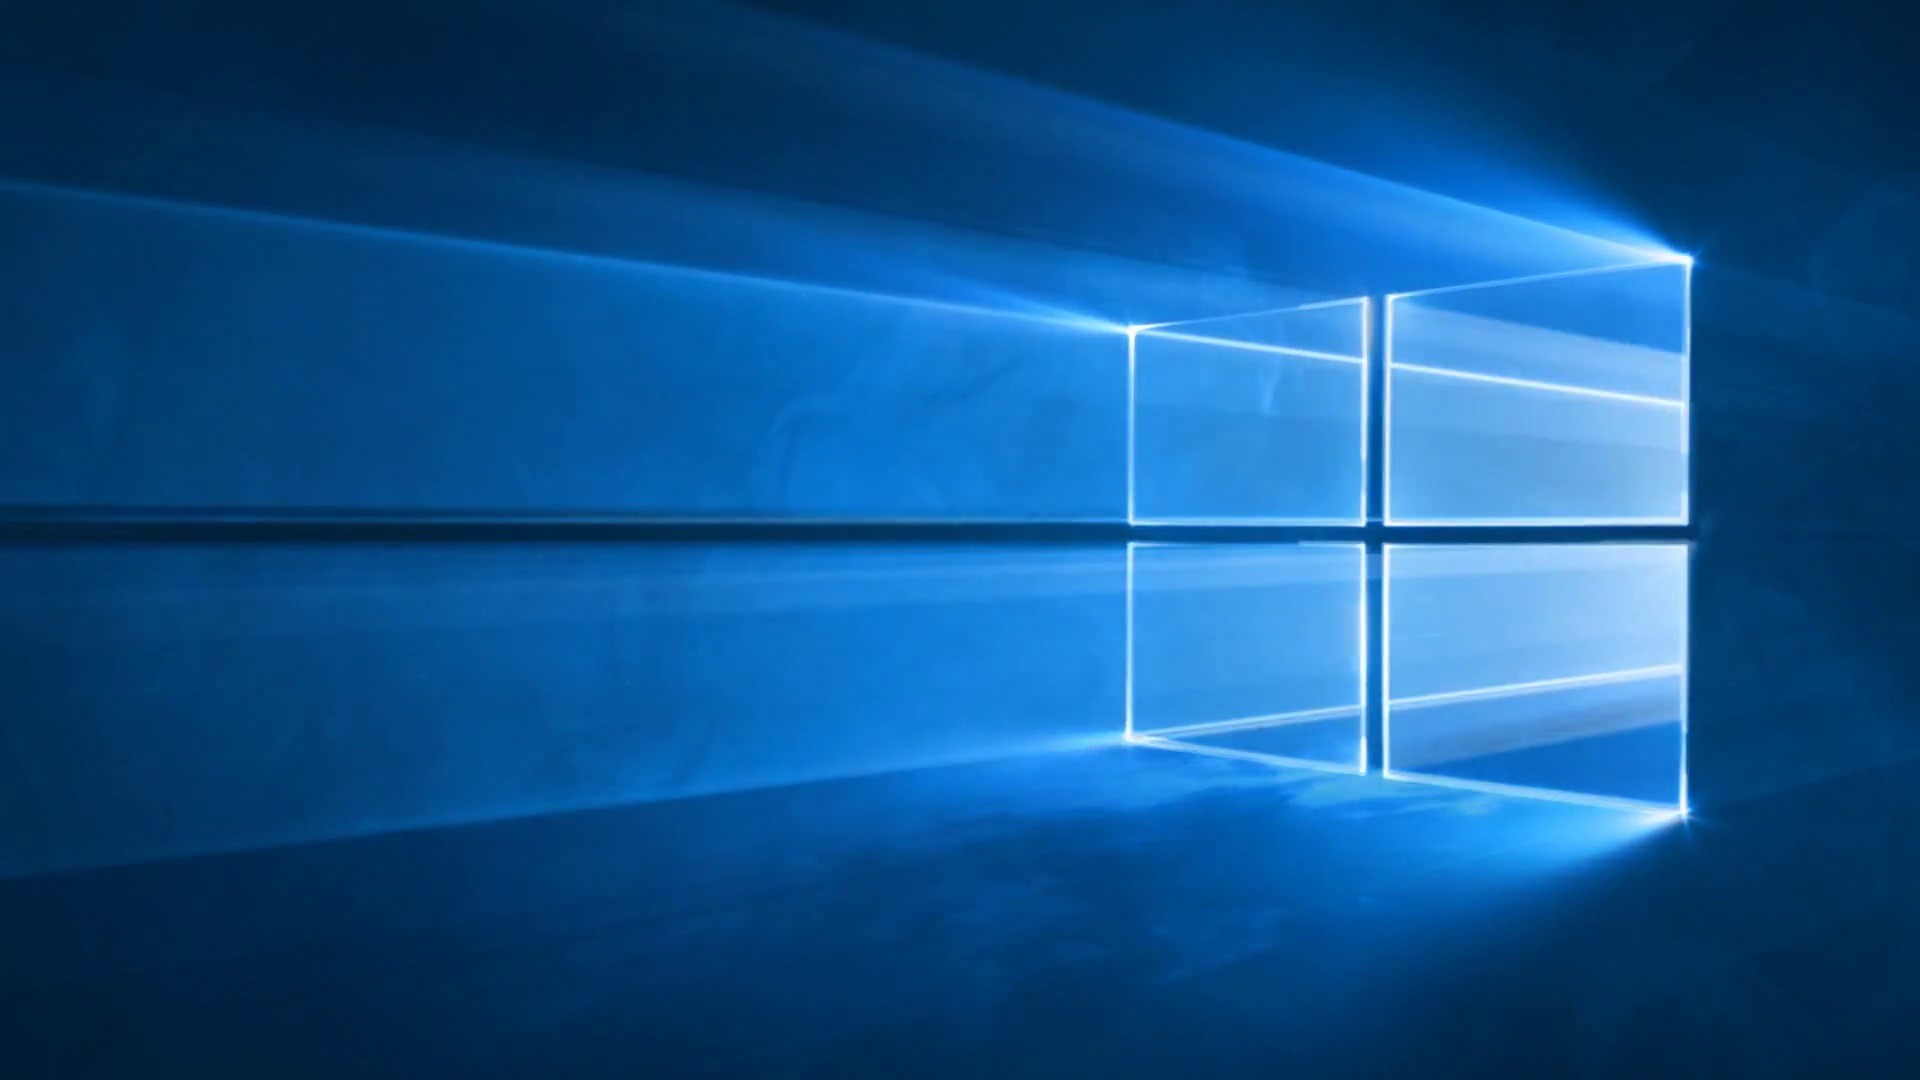 Of course no list of top Windows 10 wallpapers will be complete 1920x1080